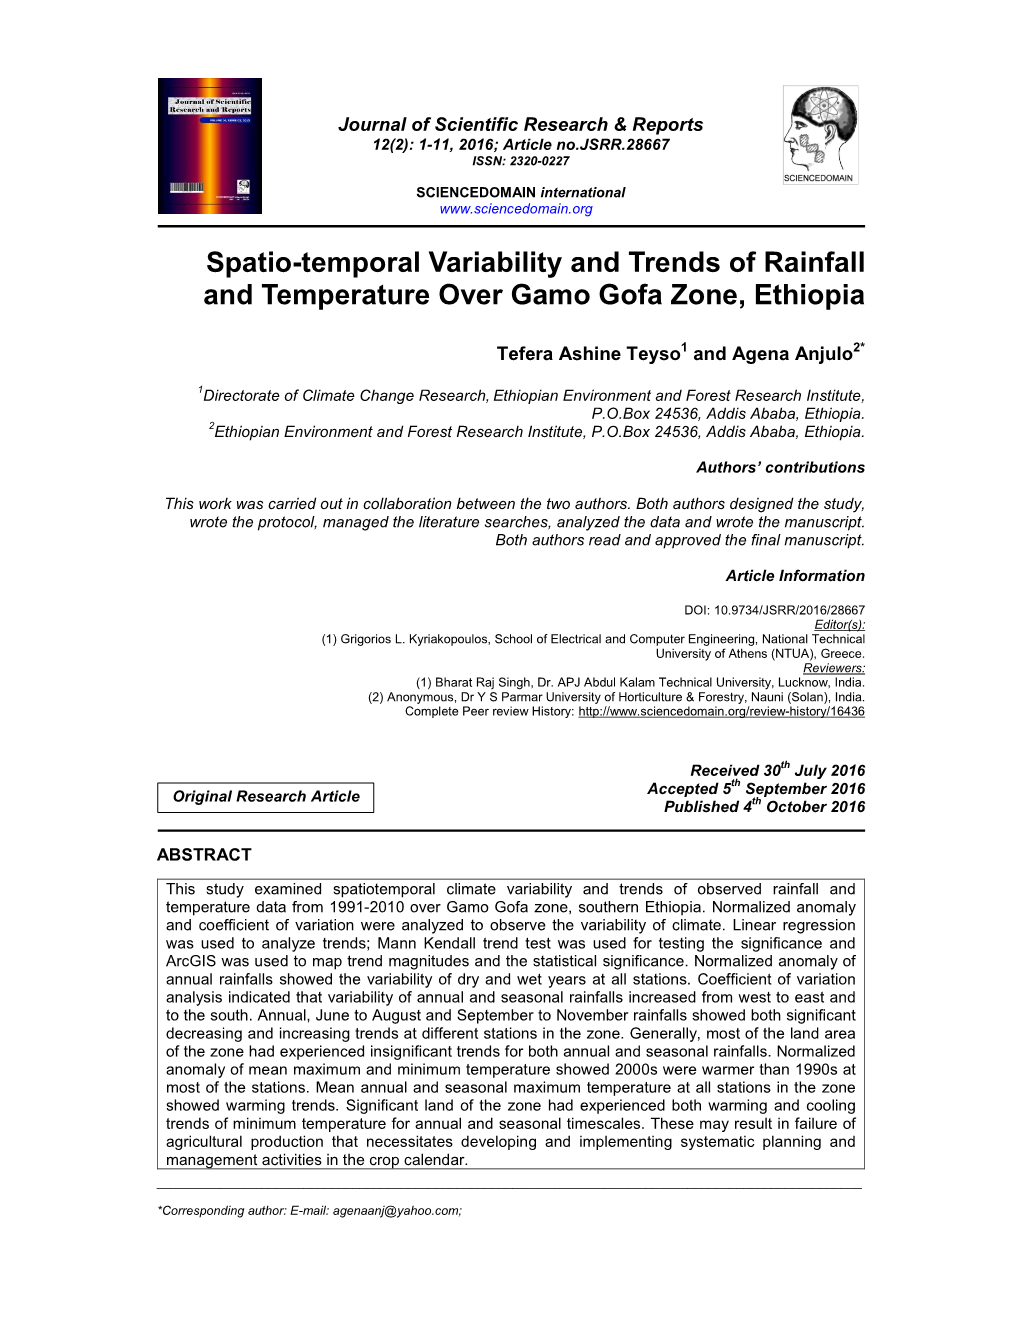 Spatio-Temporal Variability and Trends of Rainfall and Temperature Over Gamo Gofa Zone, Ethiopia